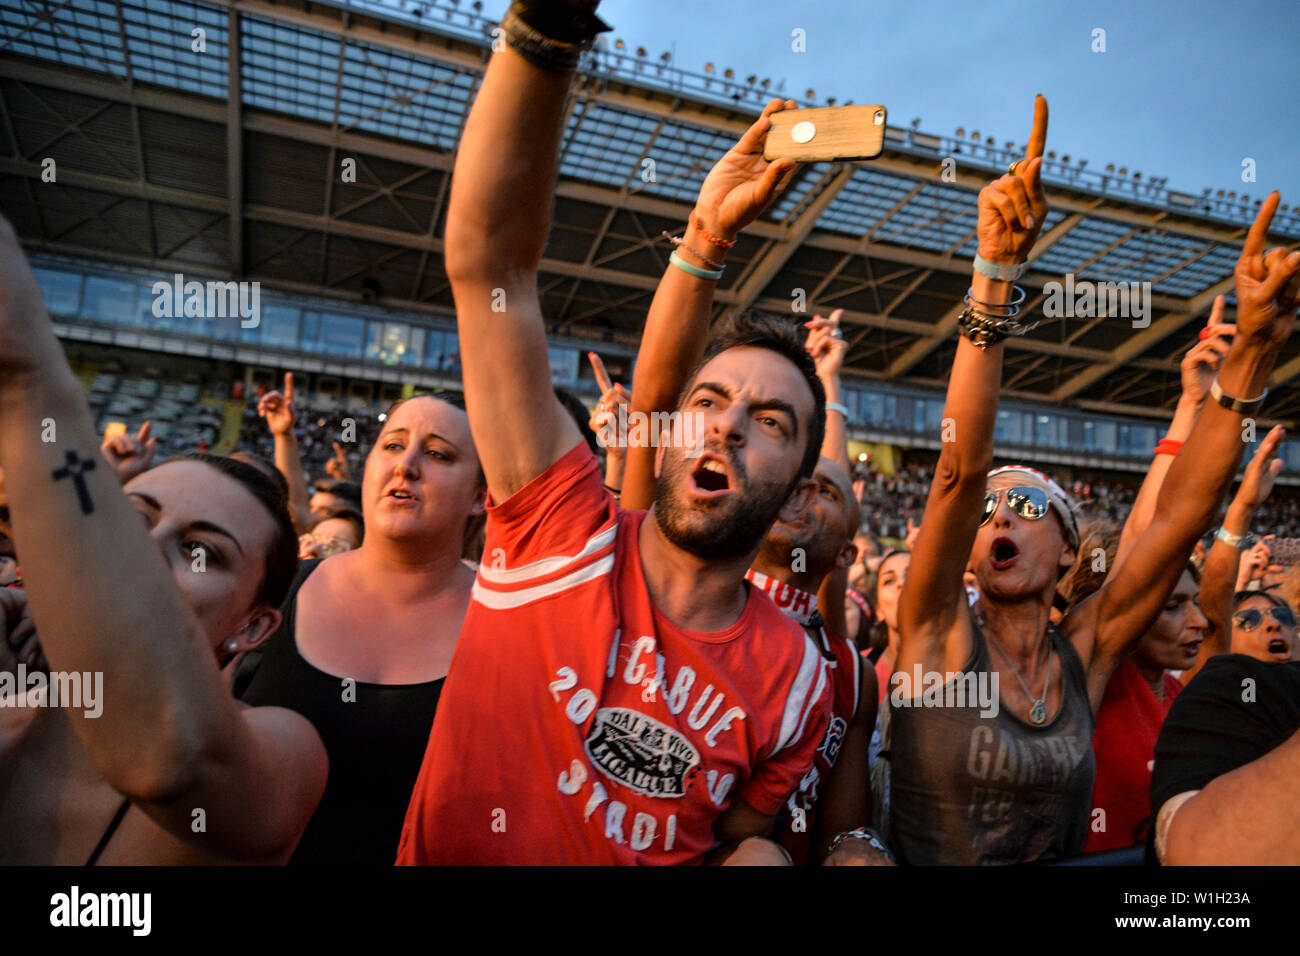 Fans cheer for Luciano Ligabue performing live on stage at the Stadio Olimpico Grande Torino in Turin for the “Start Tour 2019”. Stock Photo